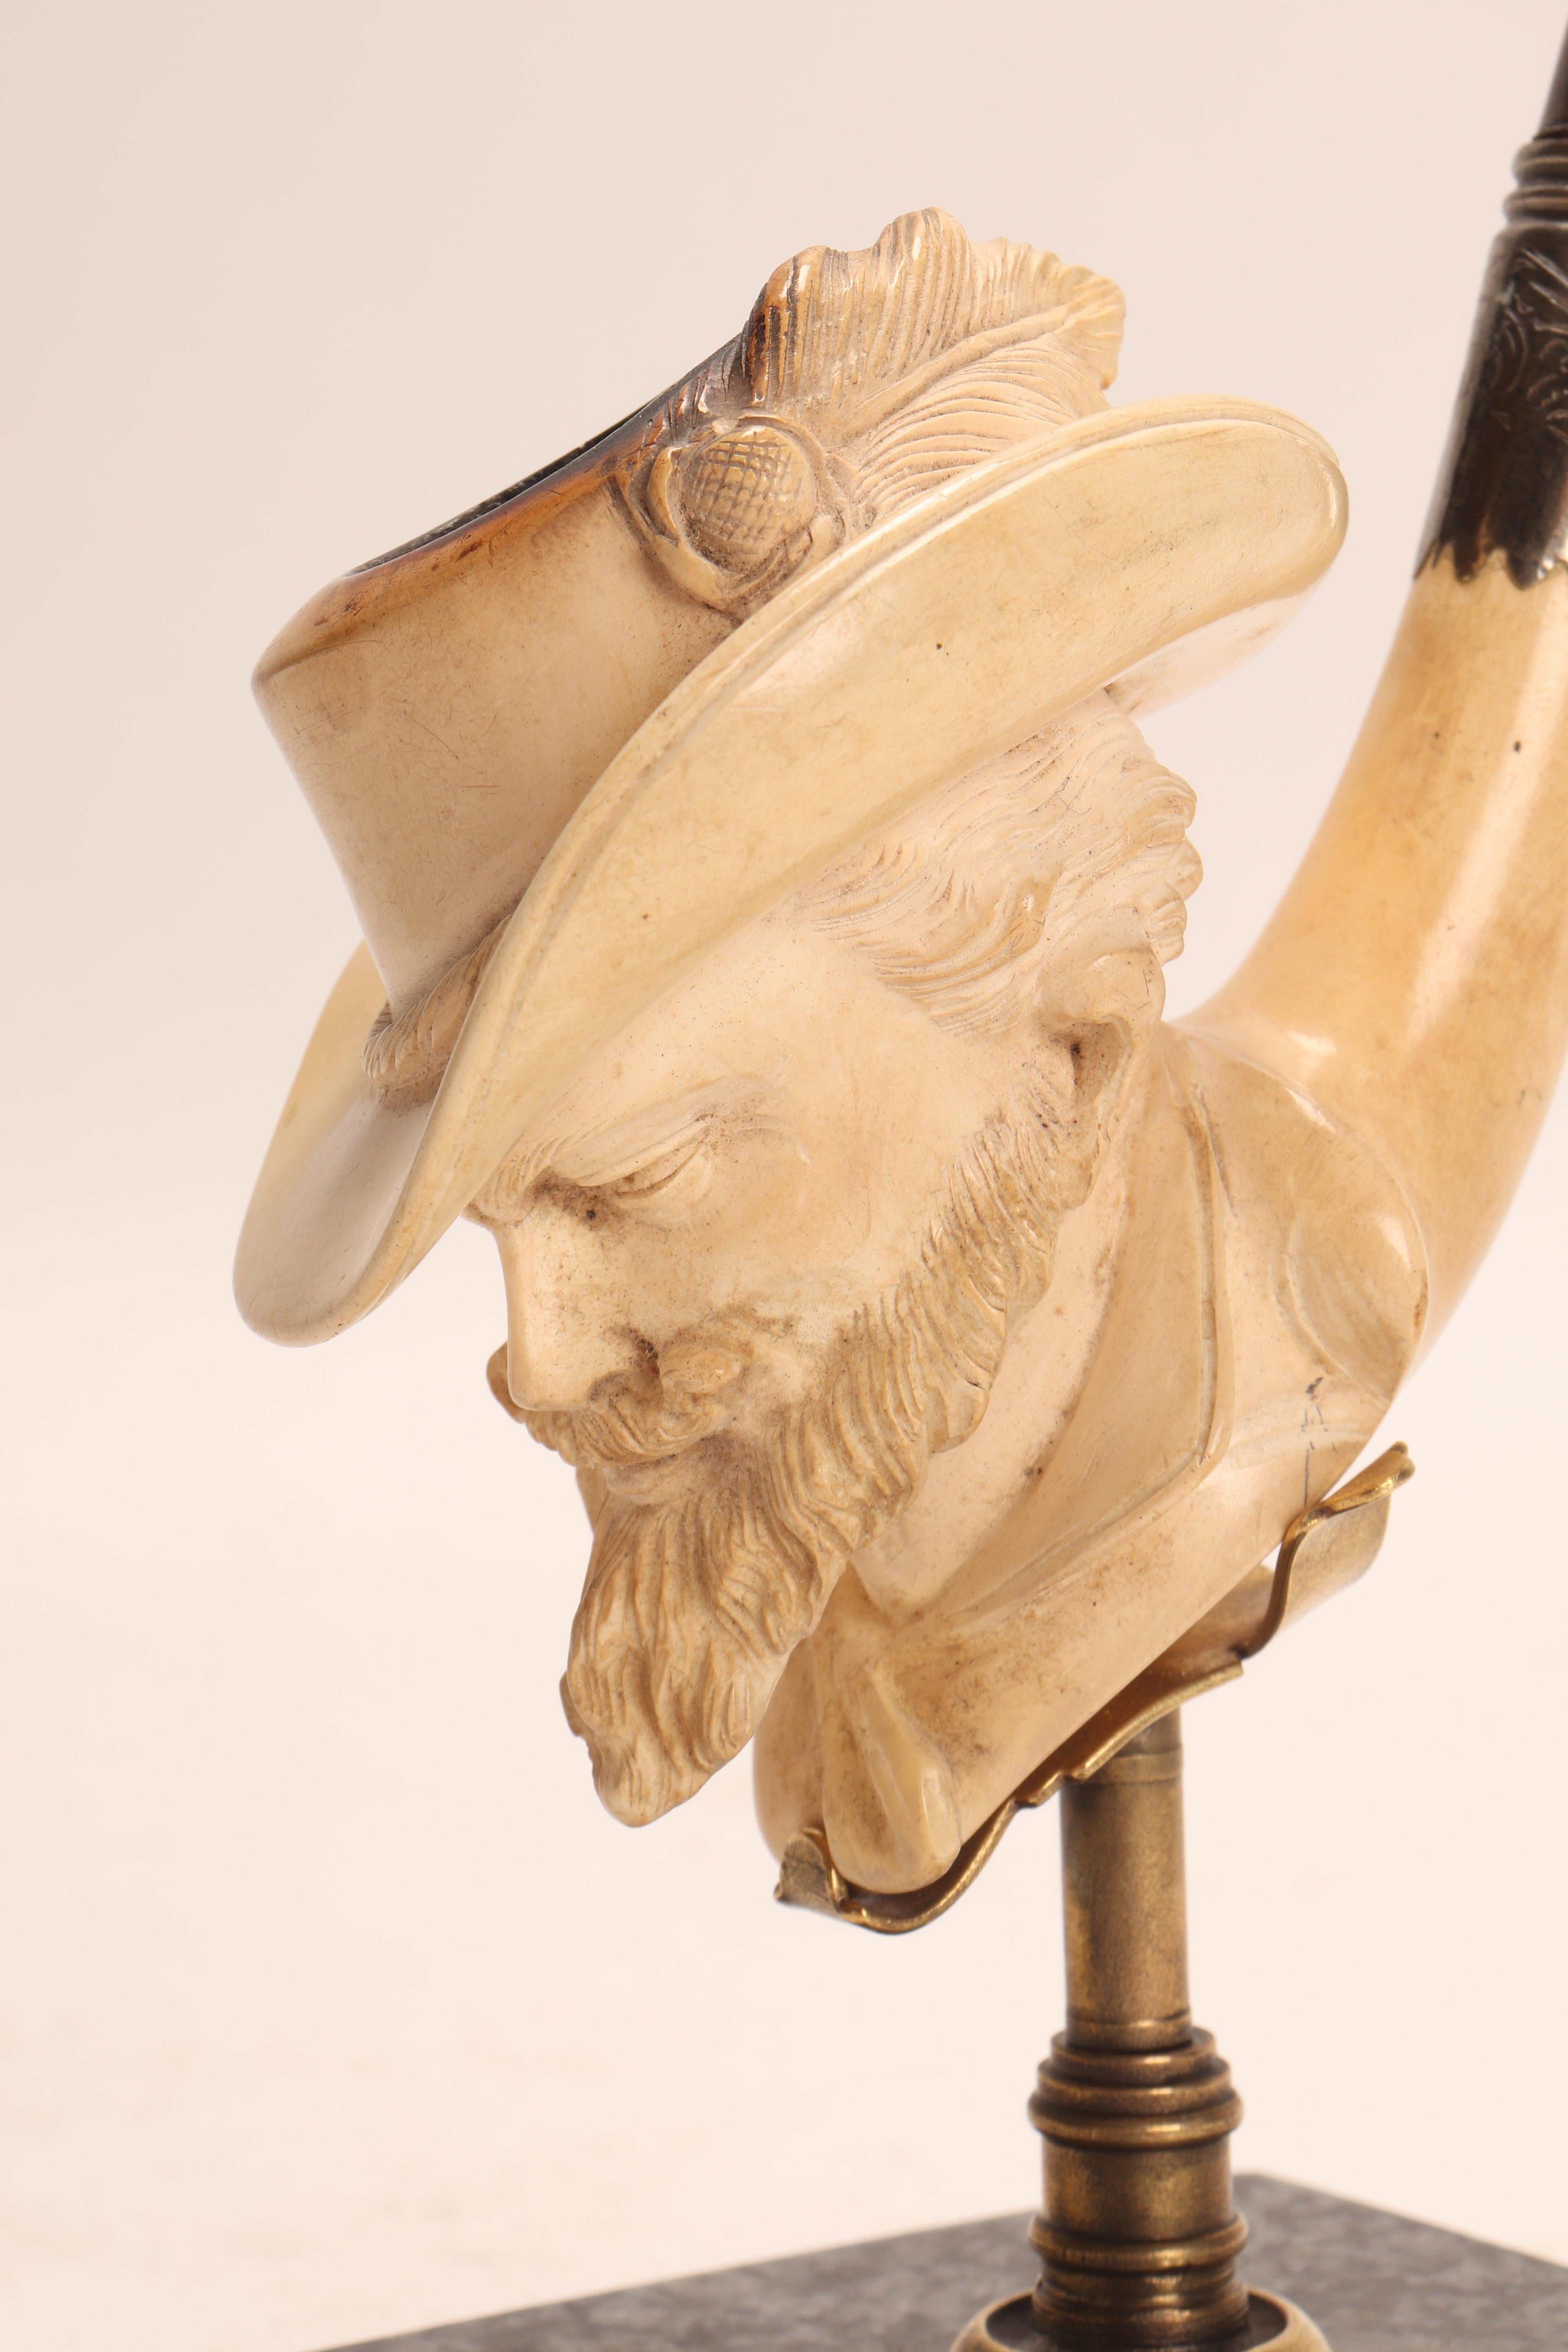 Carved meershaum pipe, with amber mouthpiece and silver band. In the bowl of the pipe, the head of General Custer is depicted, with a beard and mustache, wearing a hat with a feather. Original case. Vienna, Austria circa 1880. (The stand is for